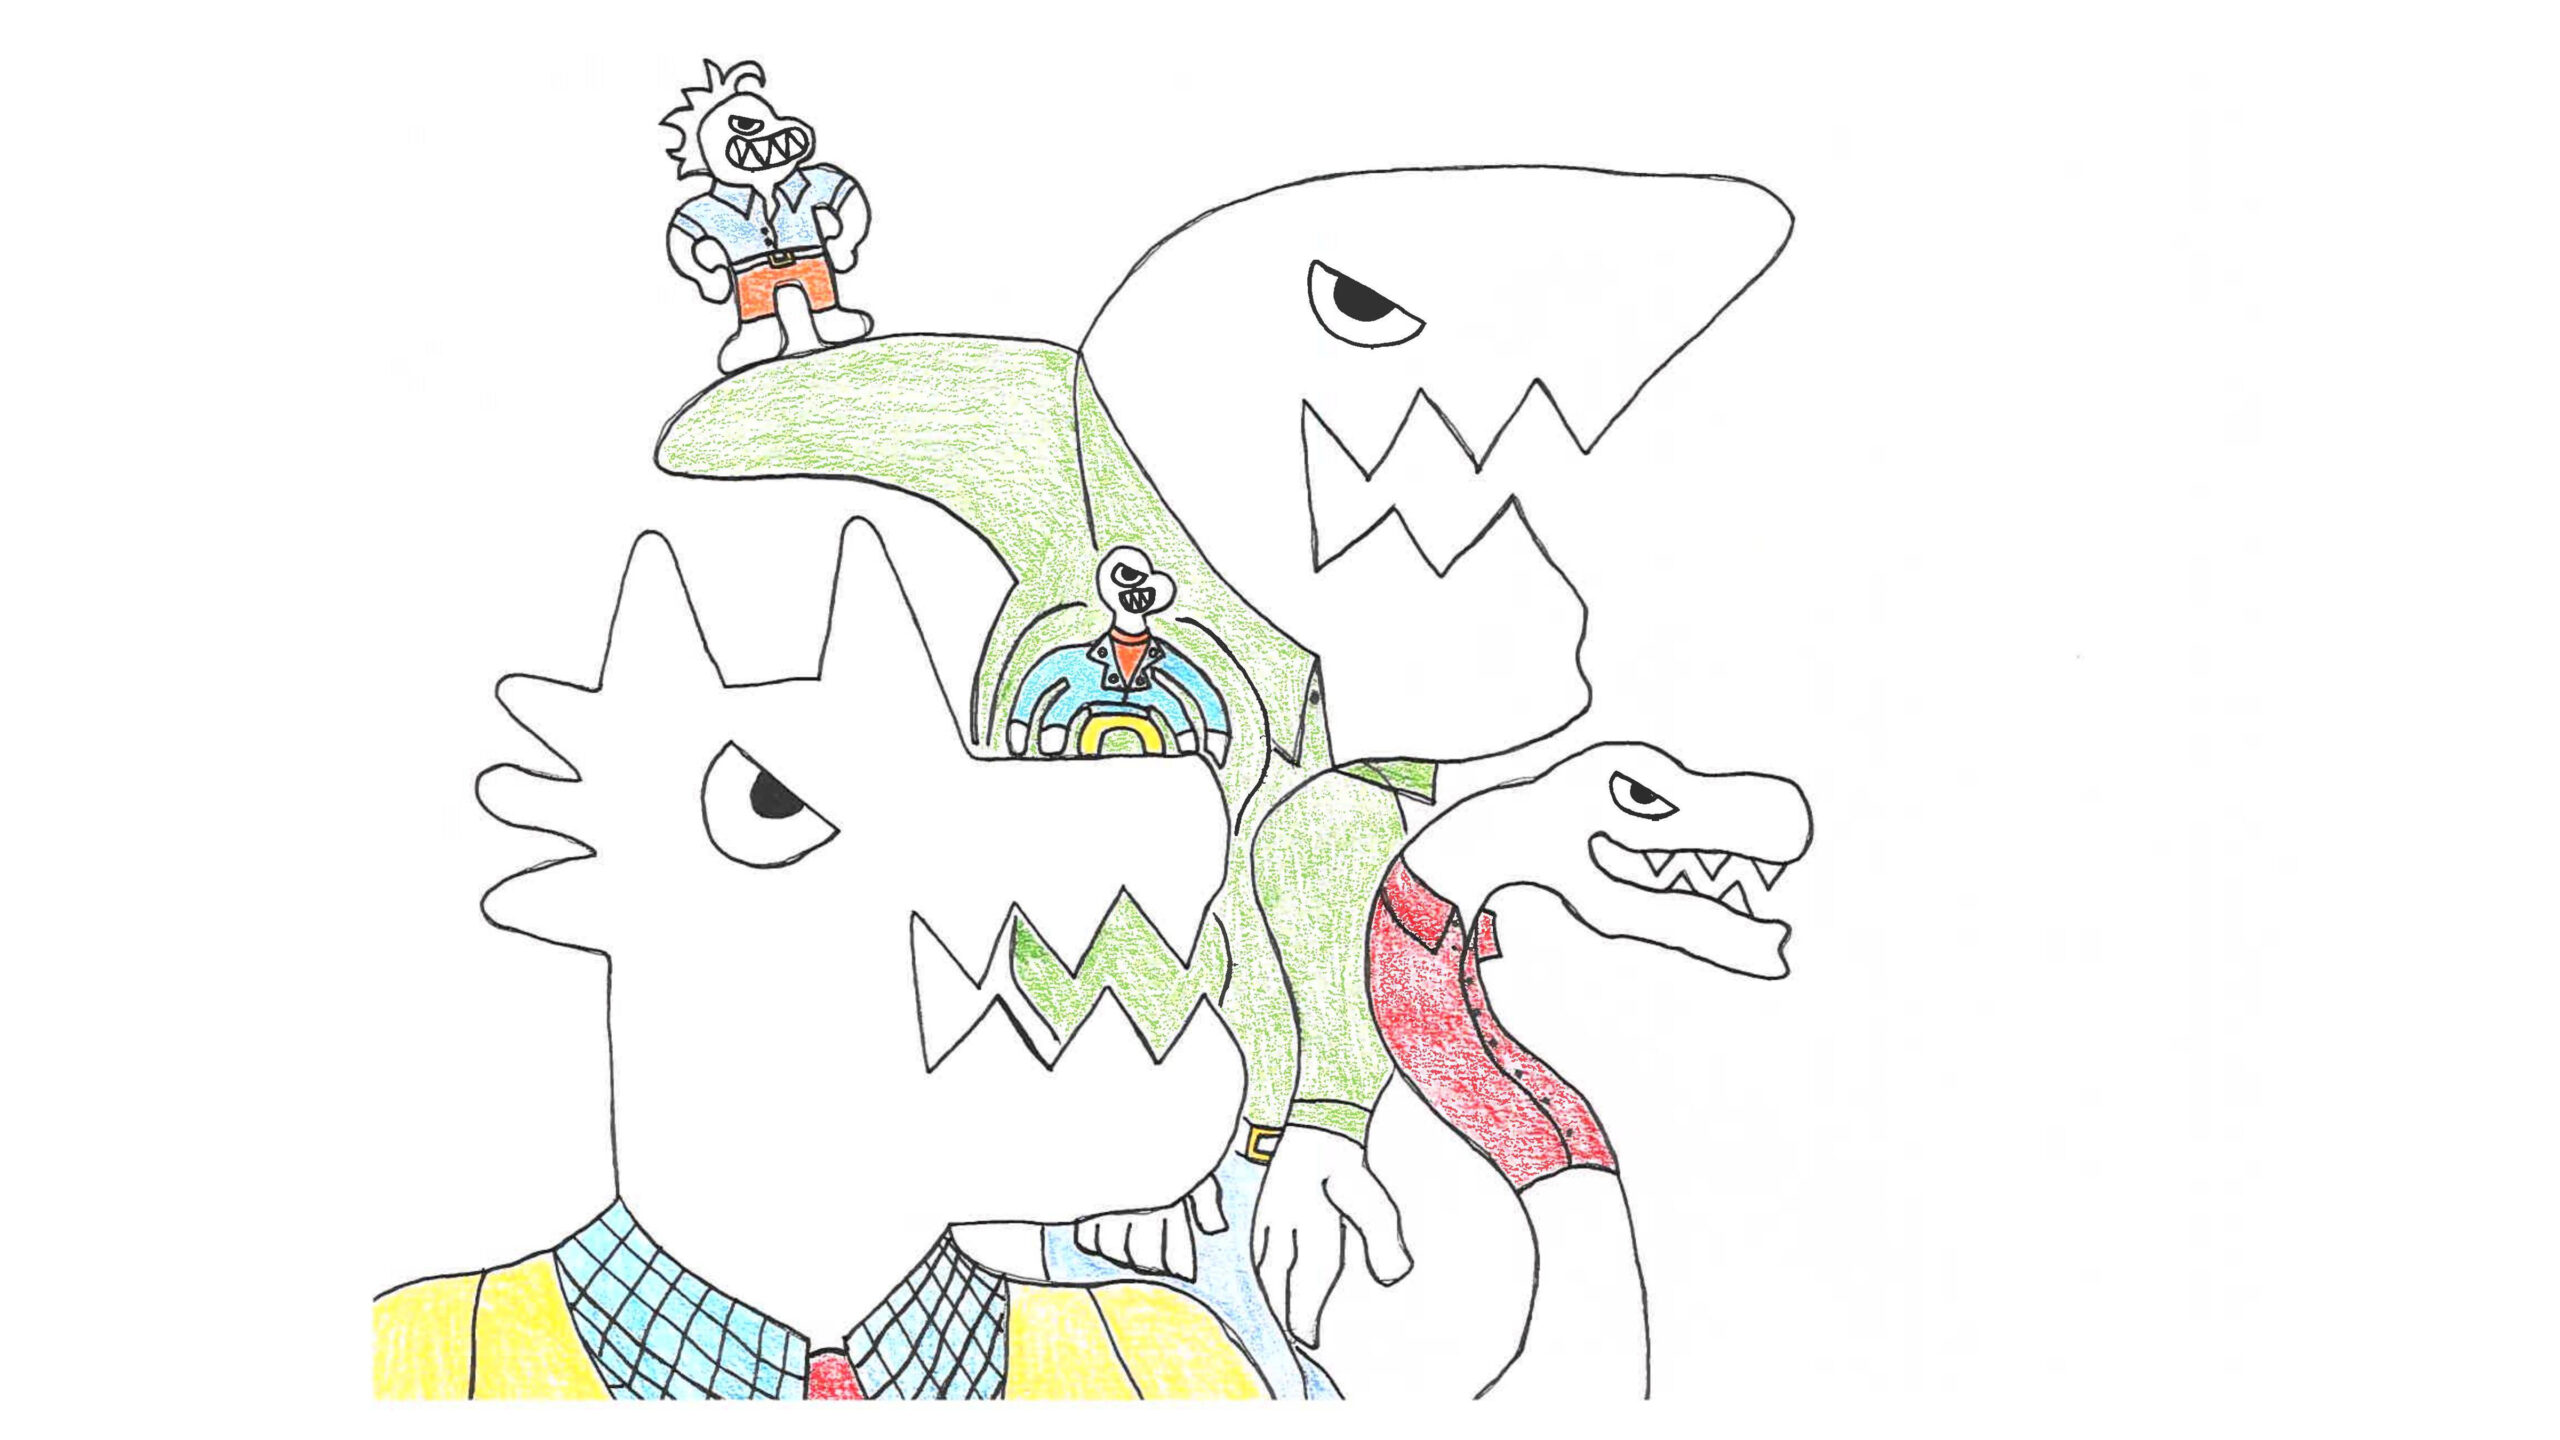 illustration of characters from the bad guys movie, including a Wolf, tarantula, piranha, snake and shark.